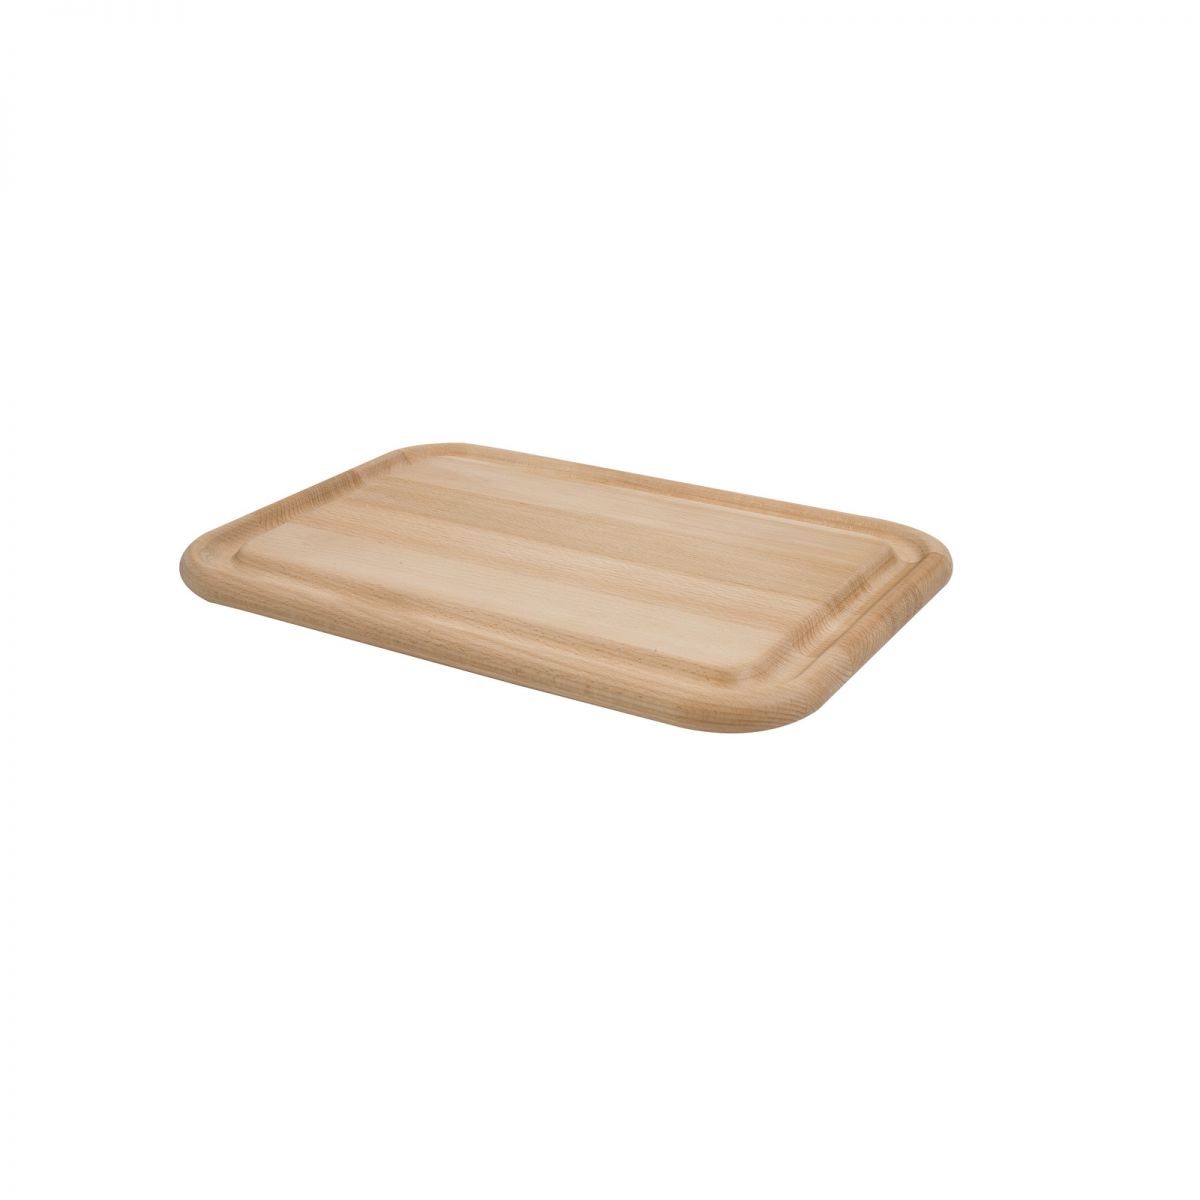 T&G Medium Rectangular Utility Board With Groove